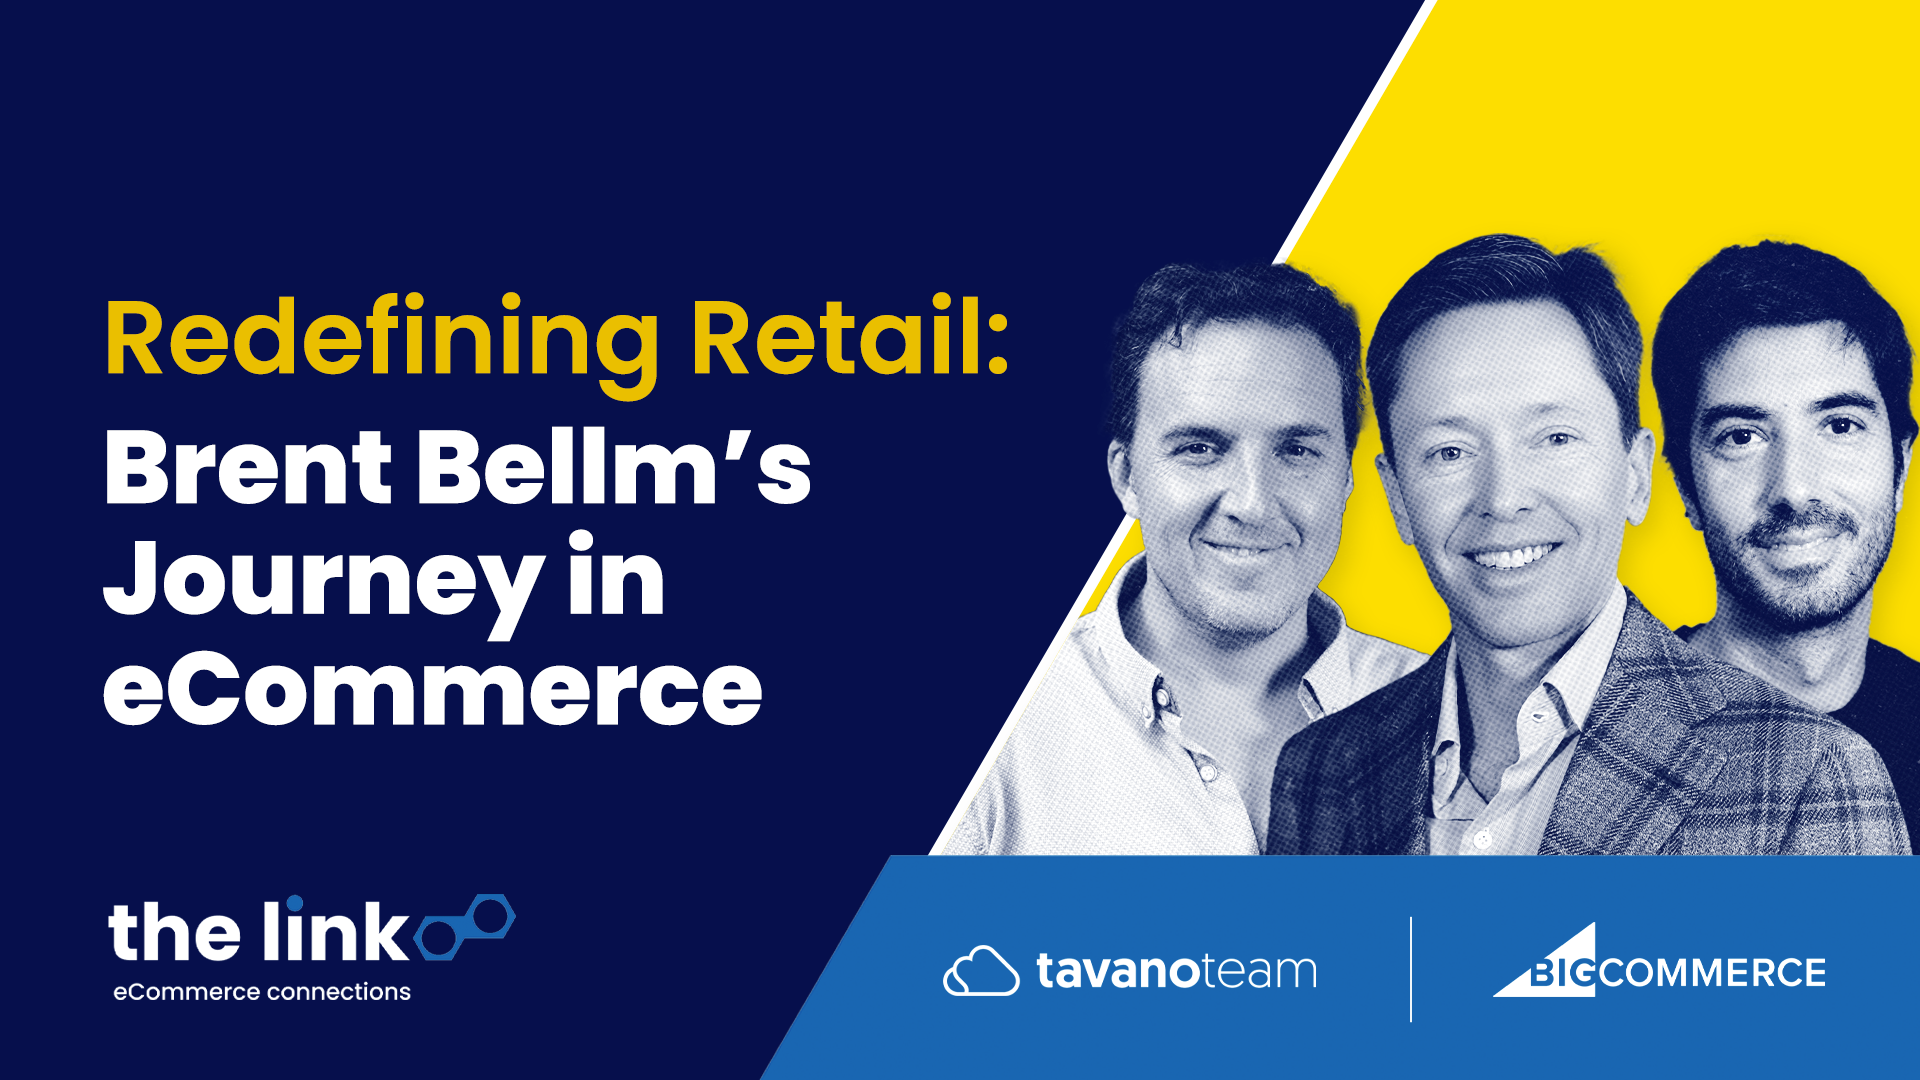 redefining-retail-brent-bellms-journey-in-ecommerce